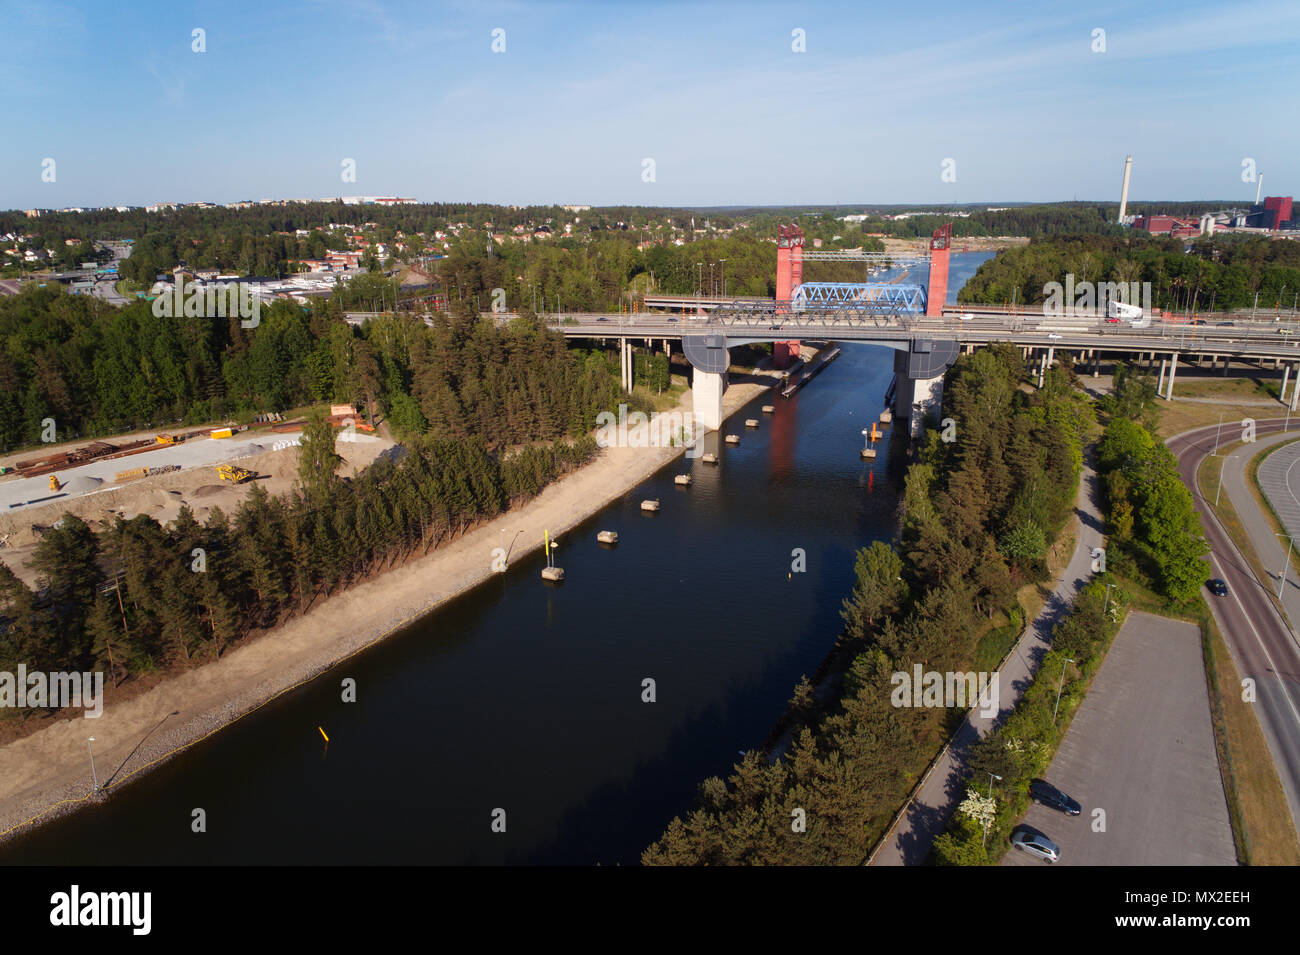 Sodertalje, Sweden - May 26, 2016: Aerial view of the Sodertalje canal towards the entrance from the Baltic Sea with three bridges crossing the canal Stock Photo